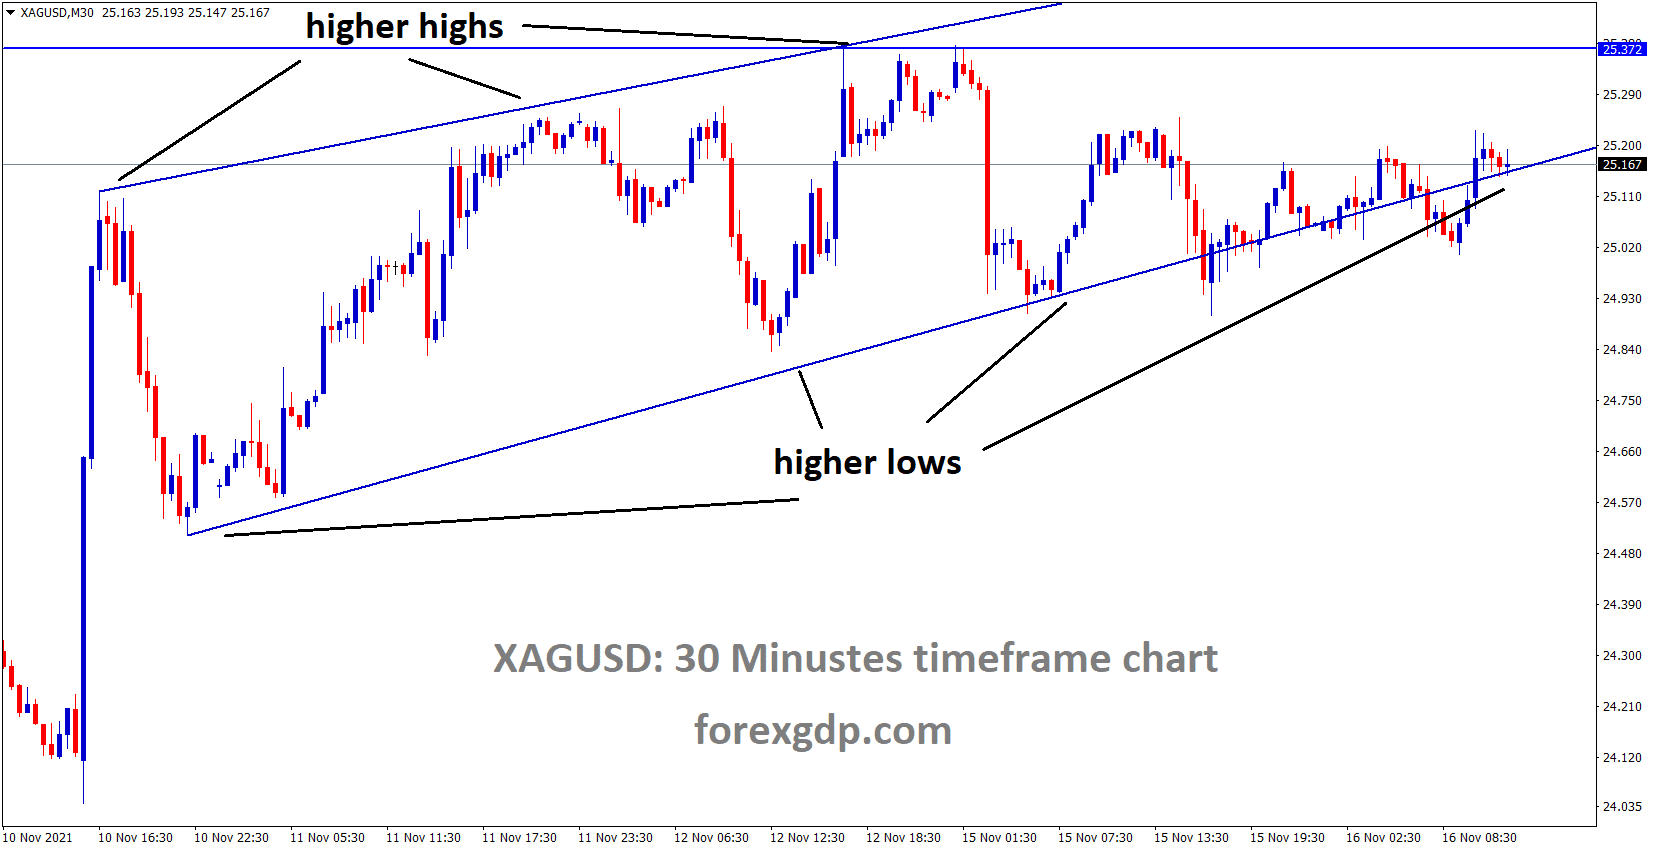 XAGUSD Silver price is moving in an Ascending channel and the market stands at the higher low area of the channel